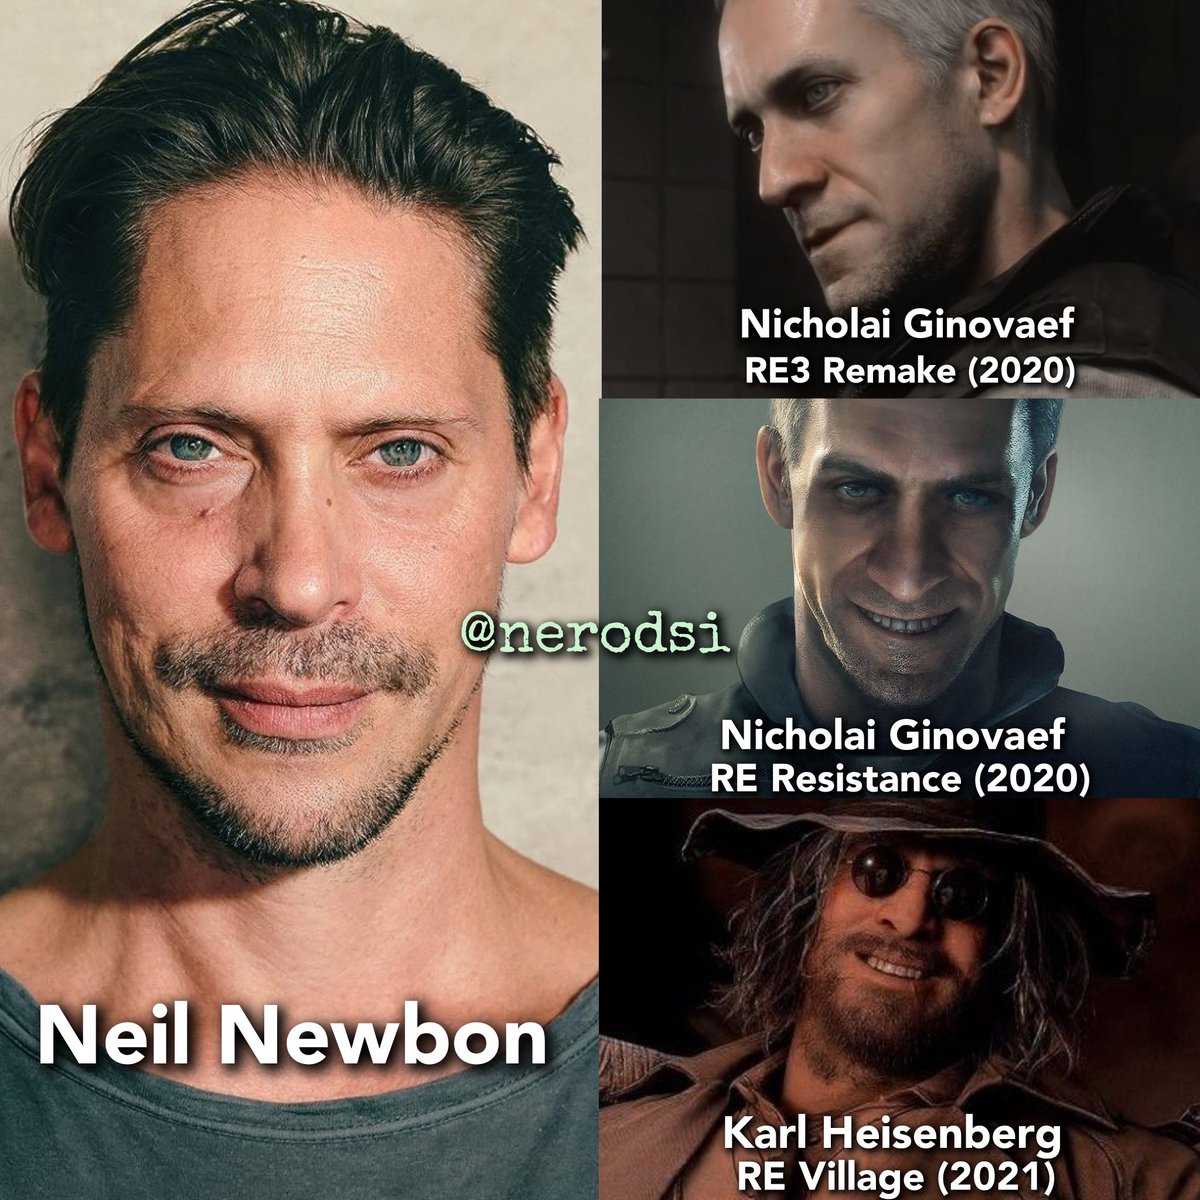 Neil Newbon is the voice actor for Nicholai Ginovaef in RE3R (2020) & RE Resistance (2020) + the voice of Karl Heisenberg in REVillage (2021) 

(Made by me) 

#ResidentEvil #REBHFun #REBH28th #ResidentEvil3 #ResidentEvil3Remake #REVillage #ResidentEvilVillage #Biohazard #Capcom